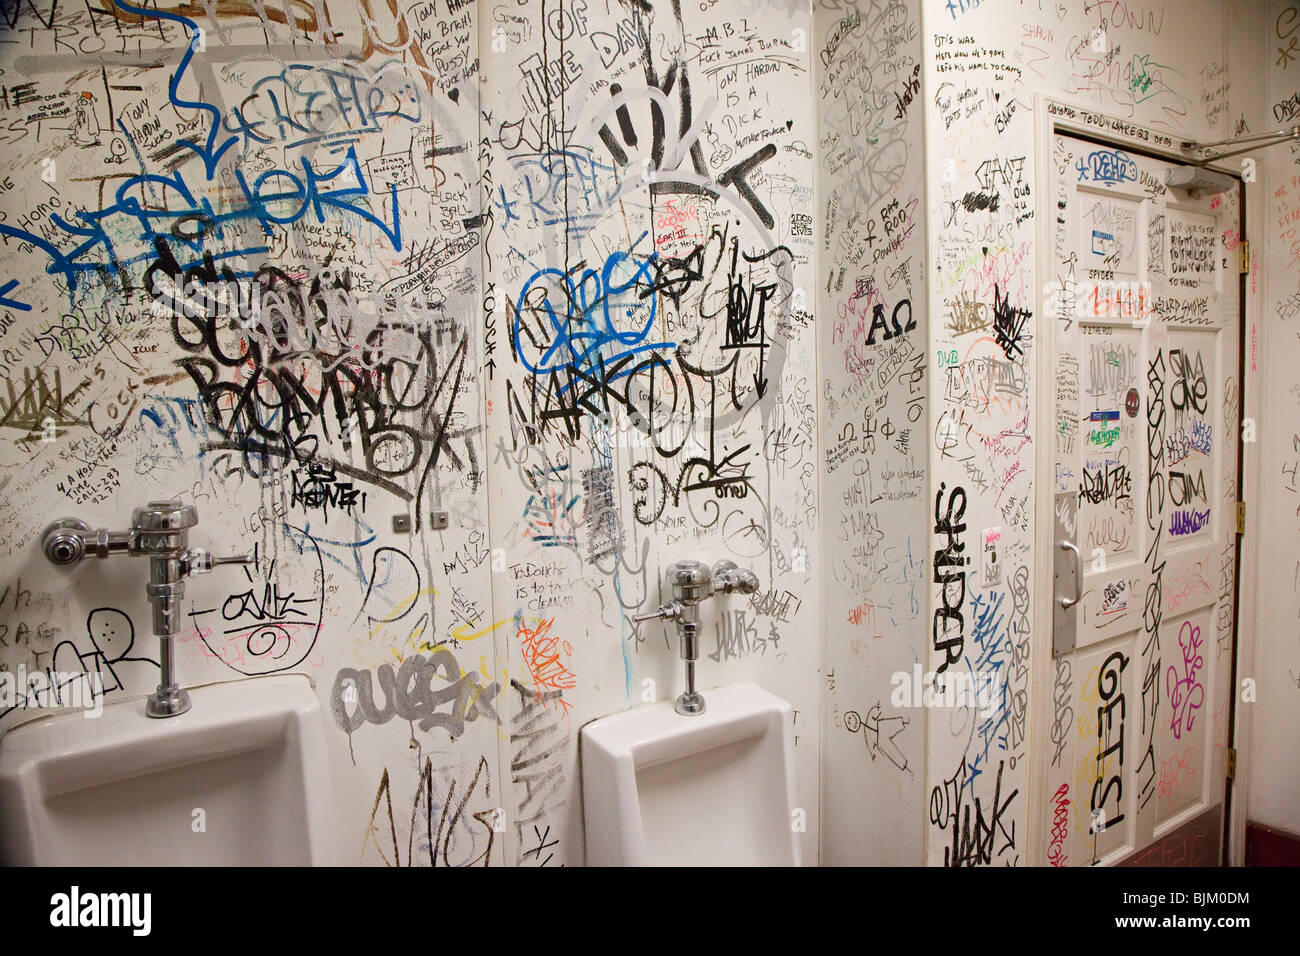 Detroit, Michigan - Graffiti covers the walls of a rest room at Honest ? John's Bar and No Grill. Stock Photo